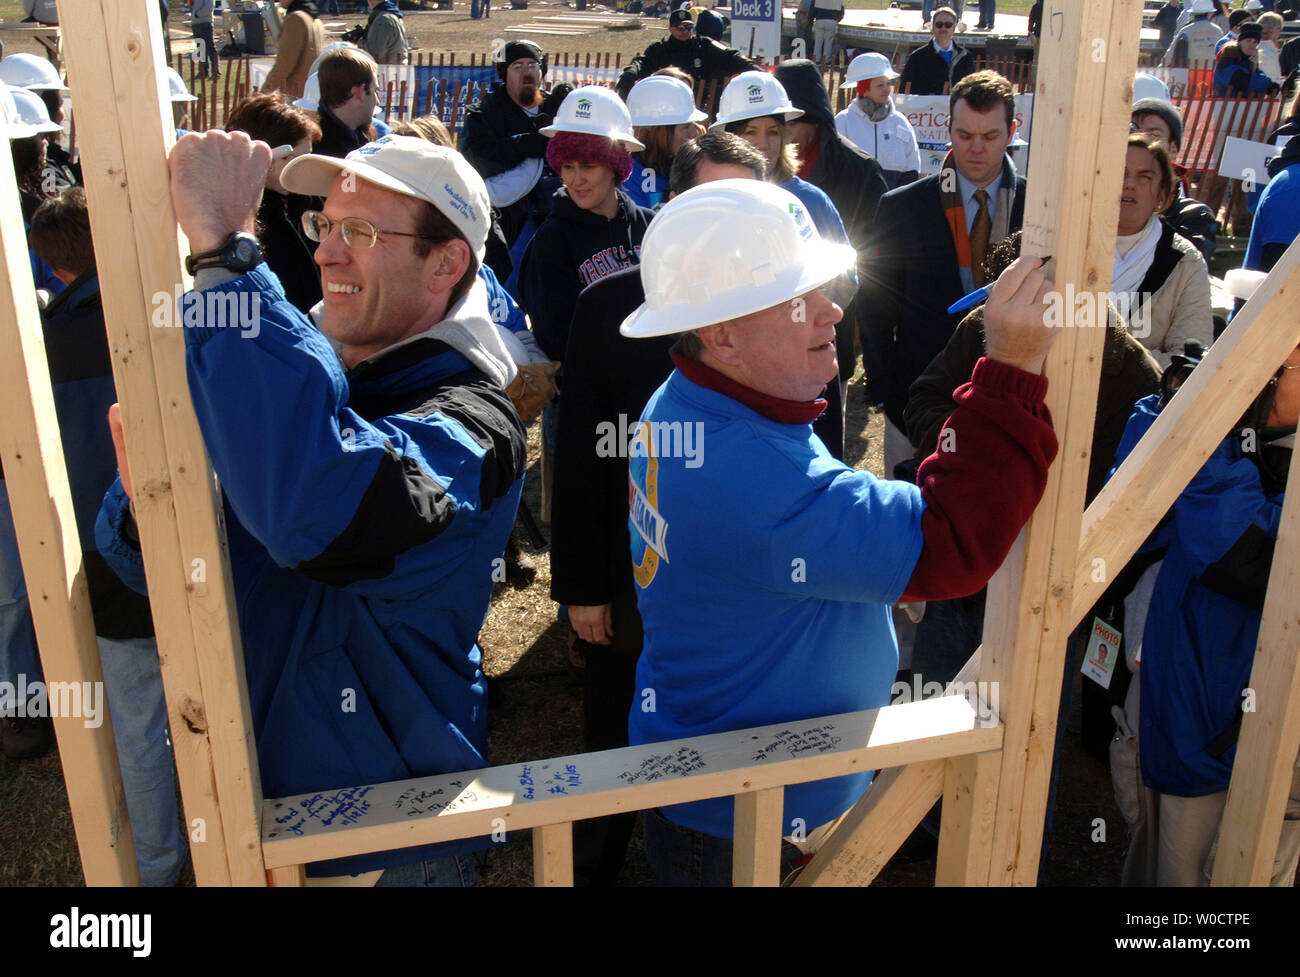 CEO of Habitat for Humanity international Jonathan Reckford (L) and President of Freddie Mac Gene McQuade write a note on a Habitat for Humanity house during the Habitat for Humanity America Builds Project, in Washington on November 18, 2005. The America Builds project is a week long 51 house build off for the the hurricane Katrina affected families of the Gulf Coast region. (UPI Photo/Kevin Dietsch) Stock Photo